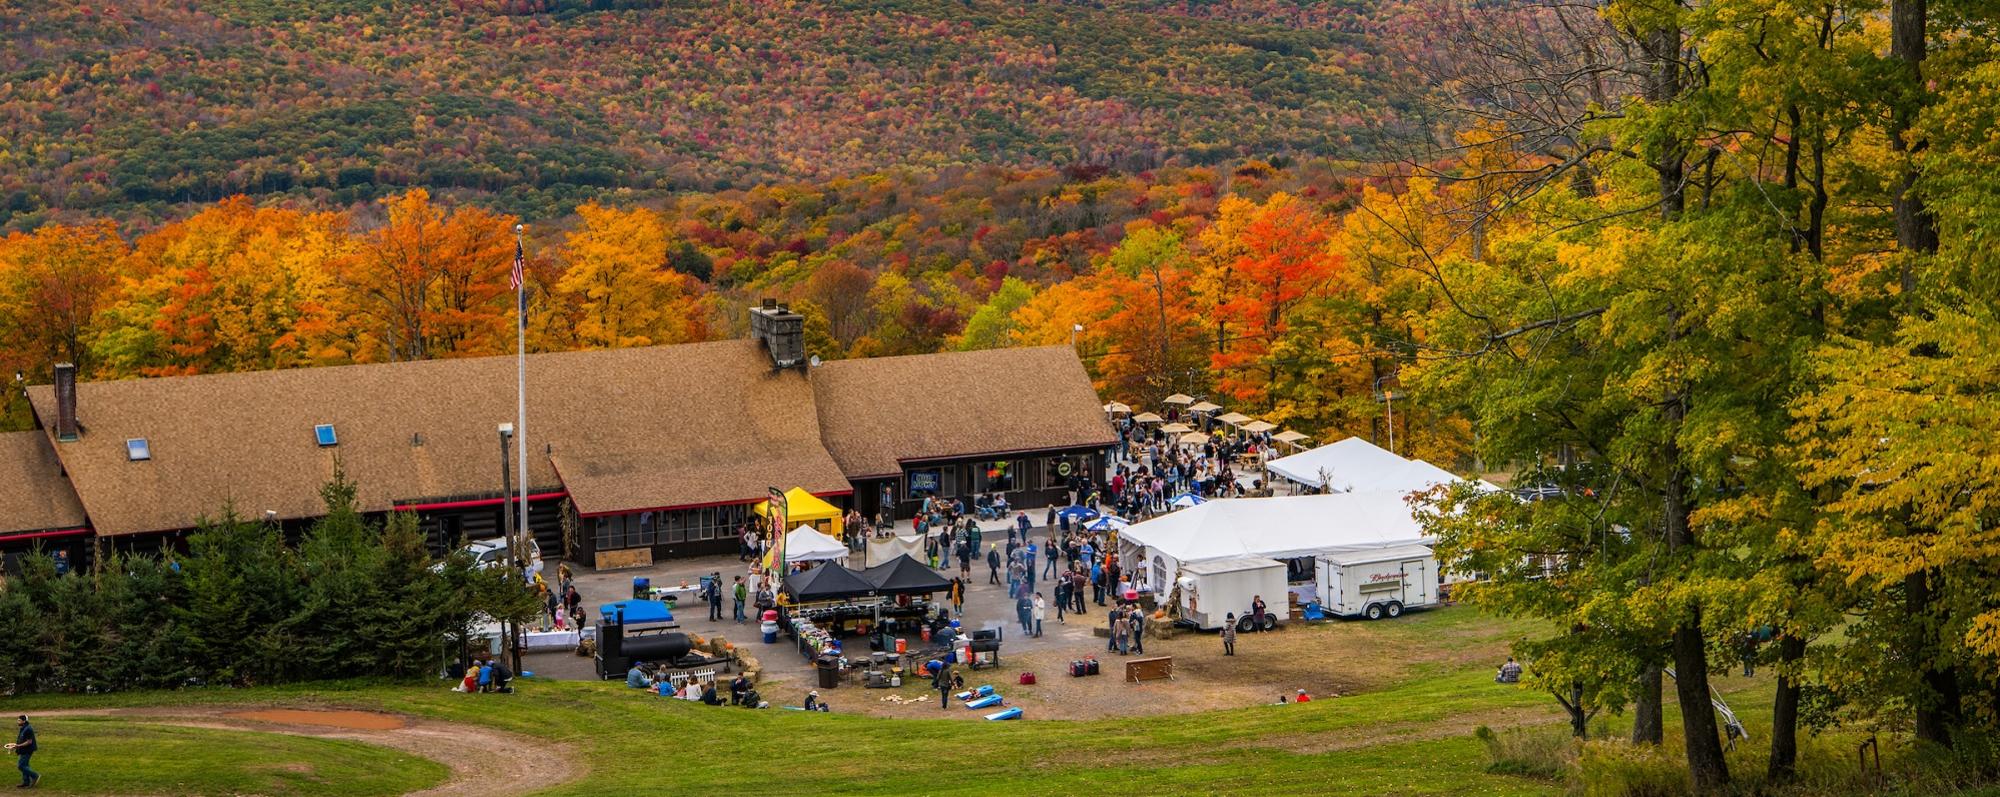 People gather at tents set up at the Belleayre Mountain Fall Festival